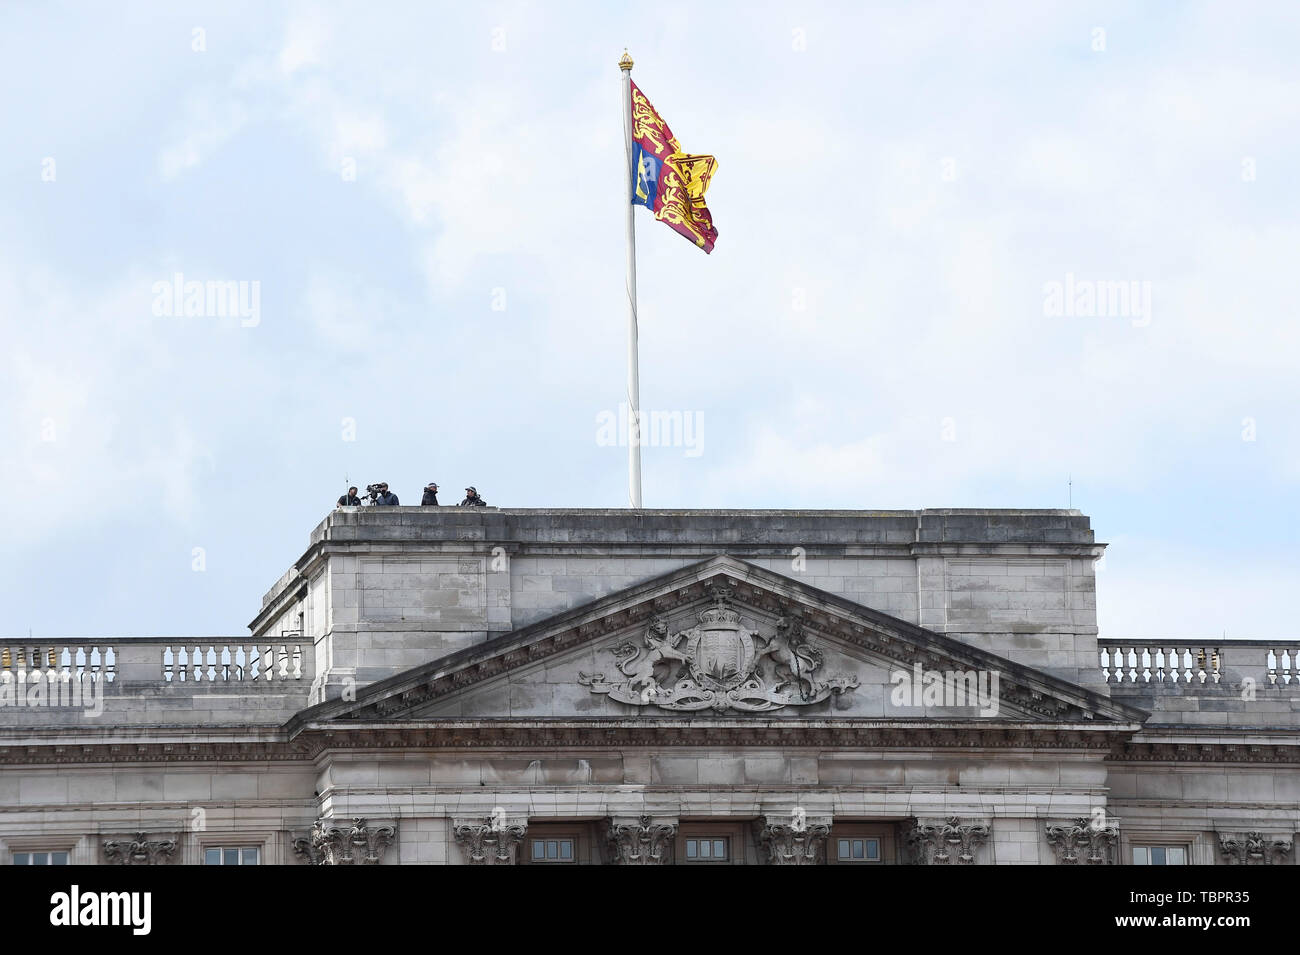 London, UK.  3 June 2019.  The Royal Standard flies above security officers on the roof of Buckingham Palace who await the arrival of Marine One, the helicopter carrying Donald Trump, on day one of his State Visit.  He will meet The Queen before commencing a variety of other engagements over the next three days.  Credit: Stephen Chung / Alamy Live News Stock Photo